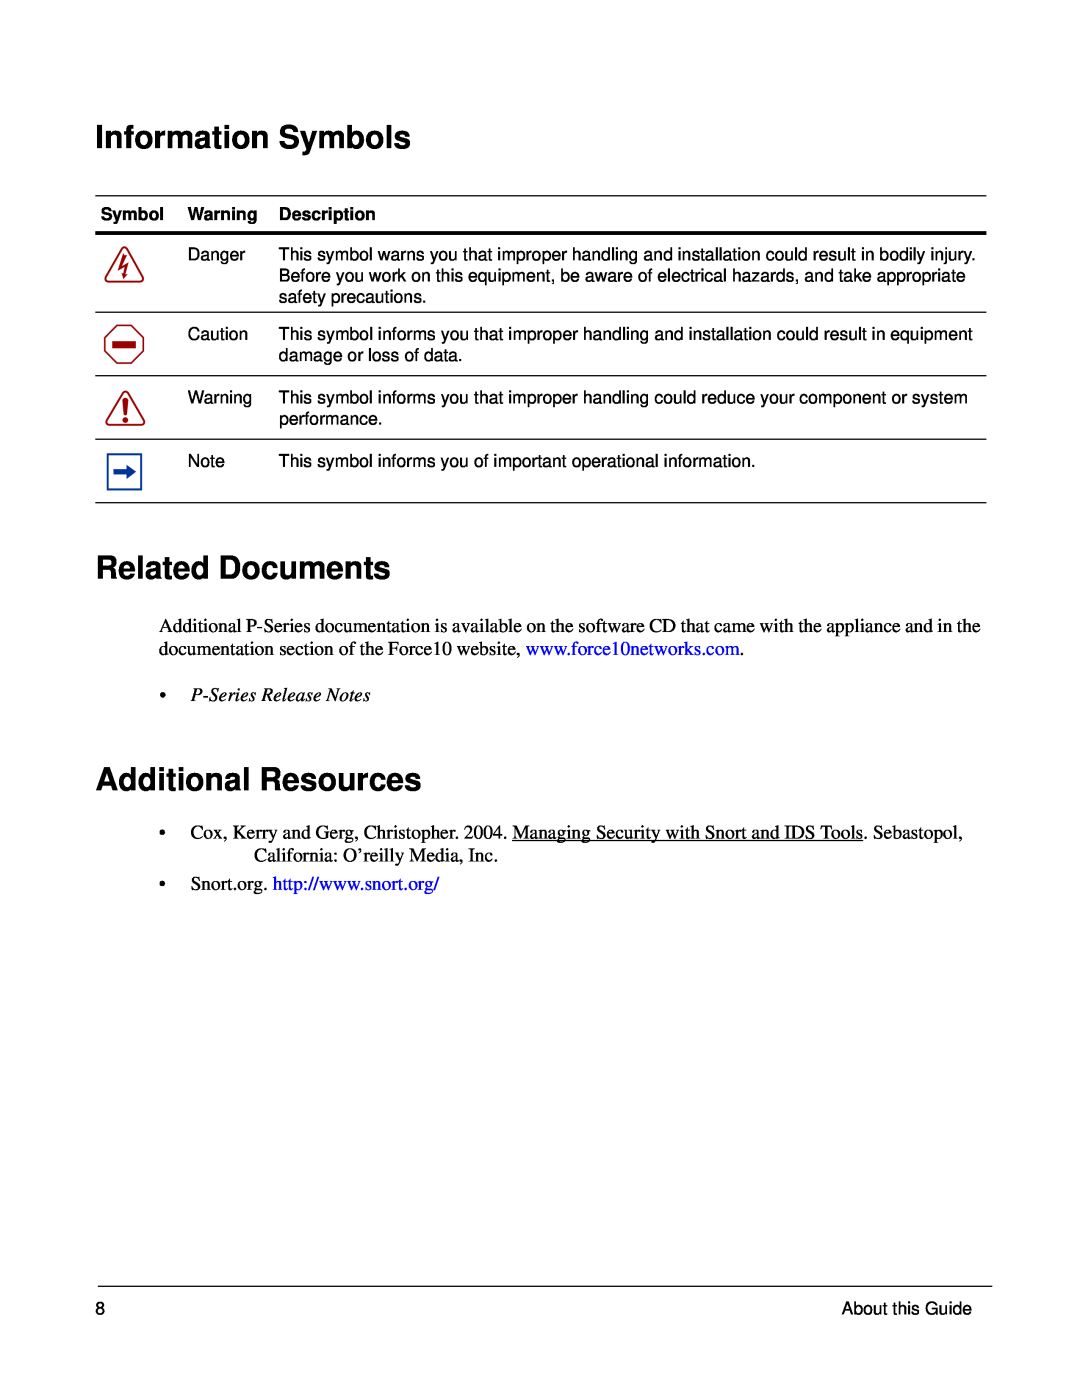 Force10 Networks 100-00055-01 manual Information Symbols, Related Documents, Additional Resources, P-Series Release Notes 